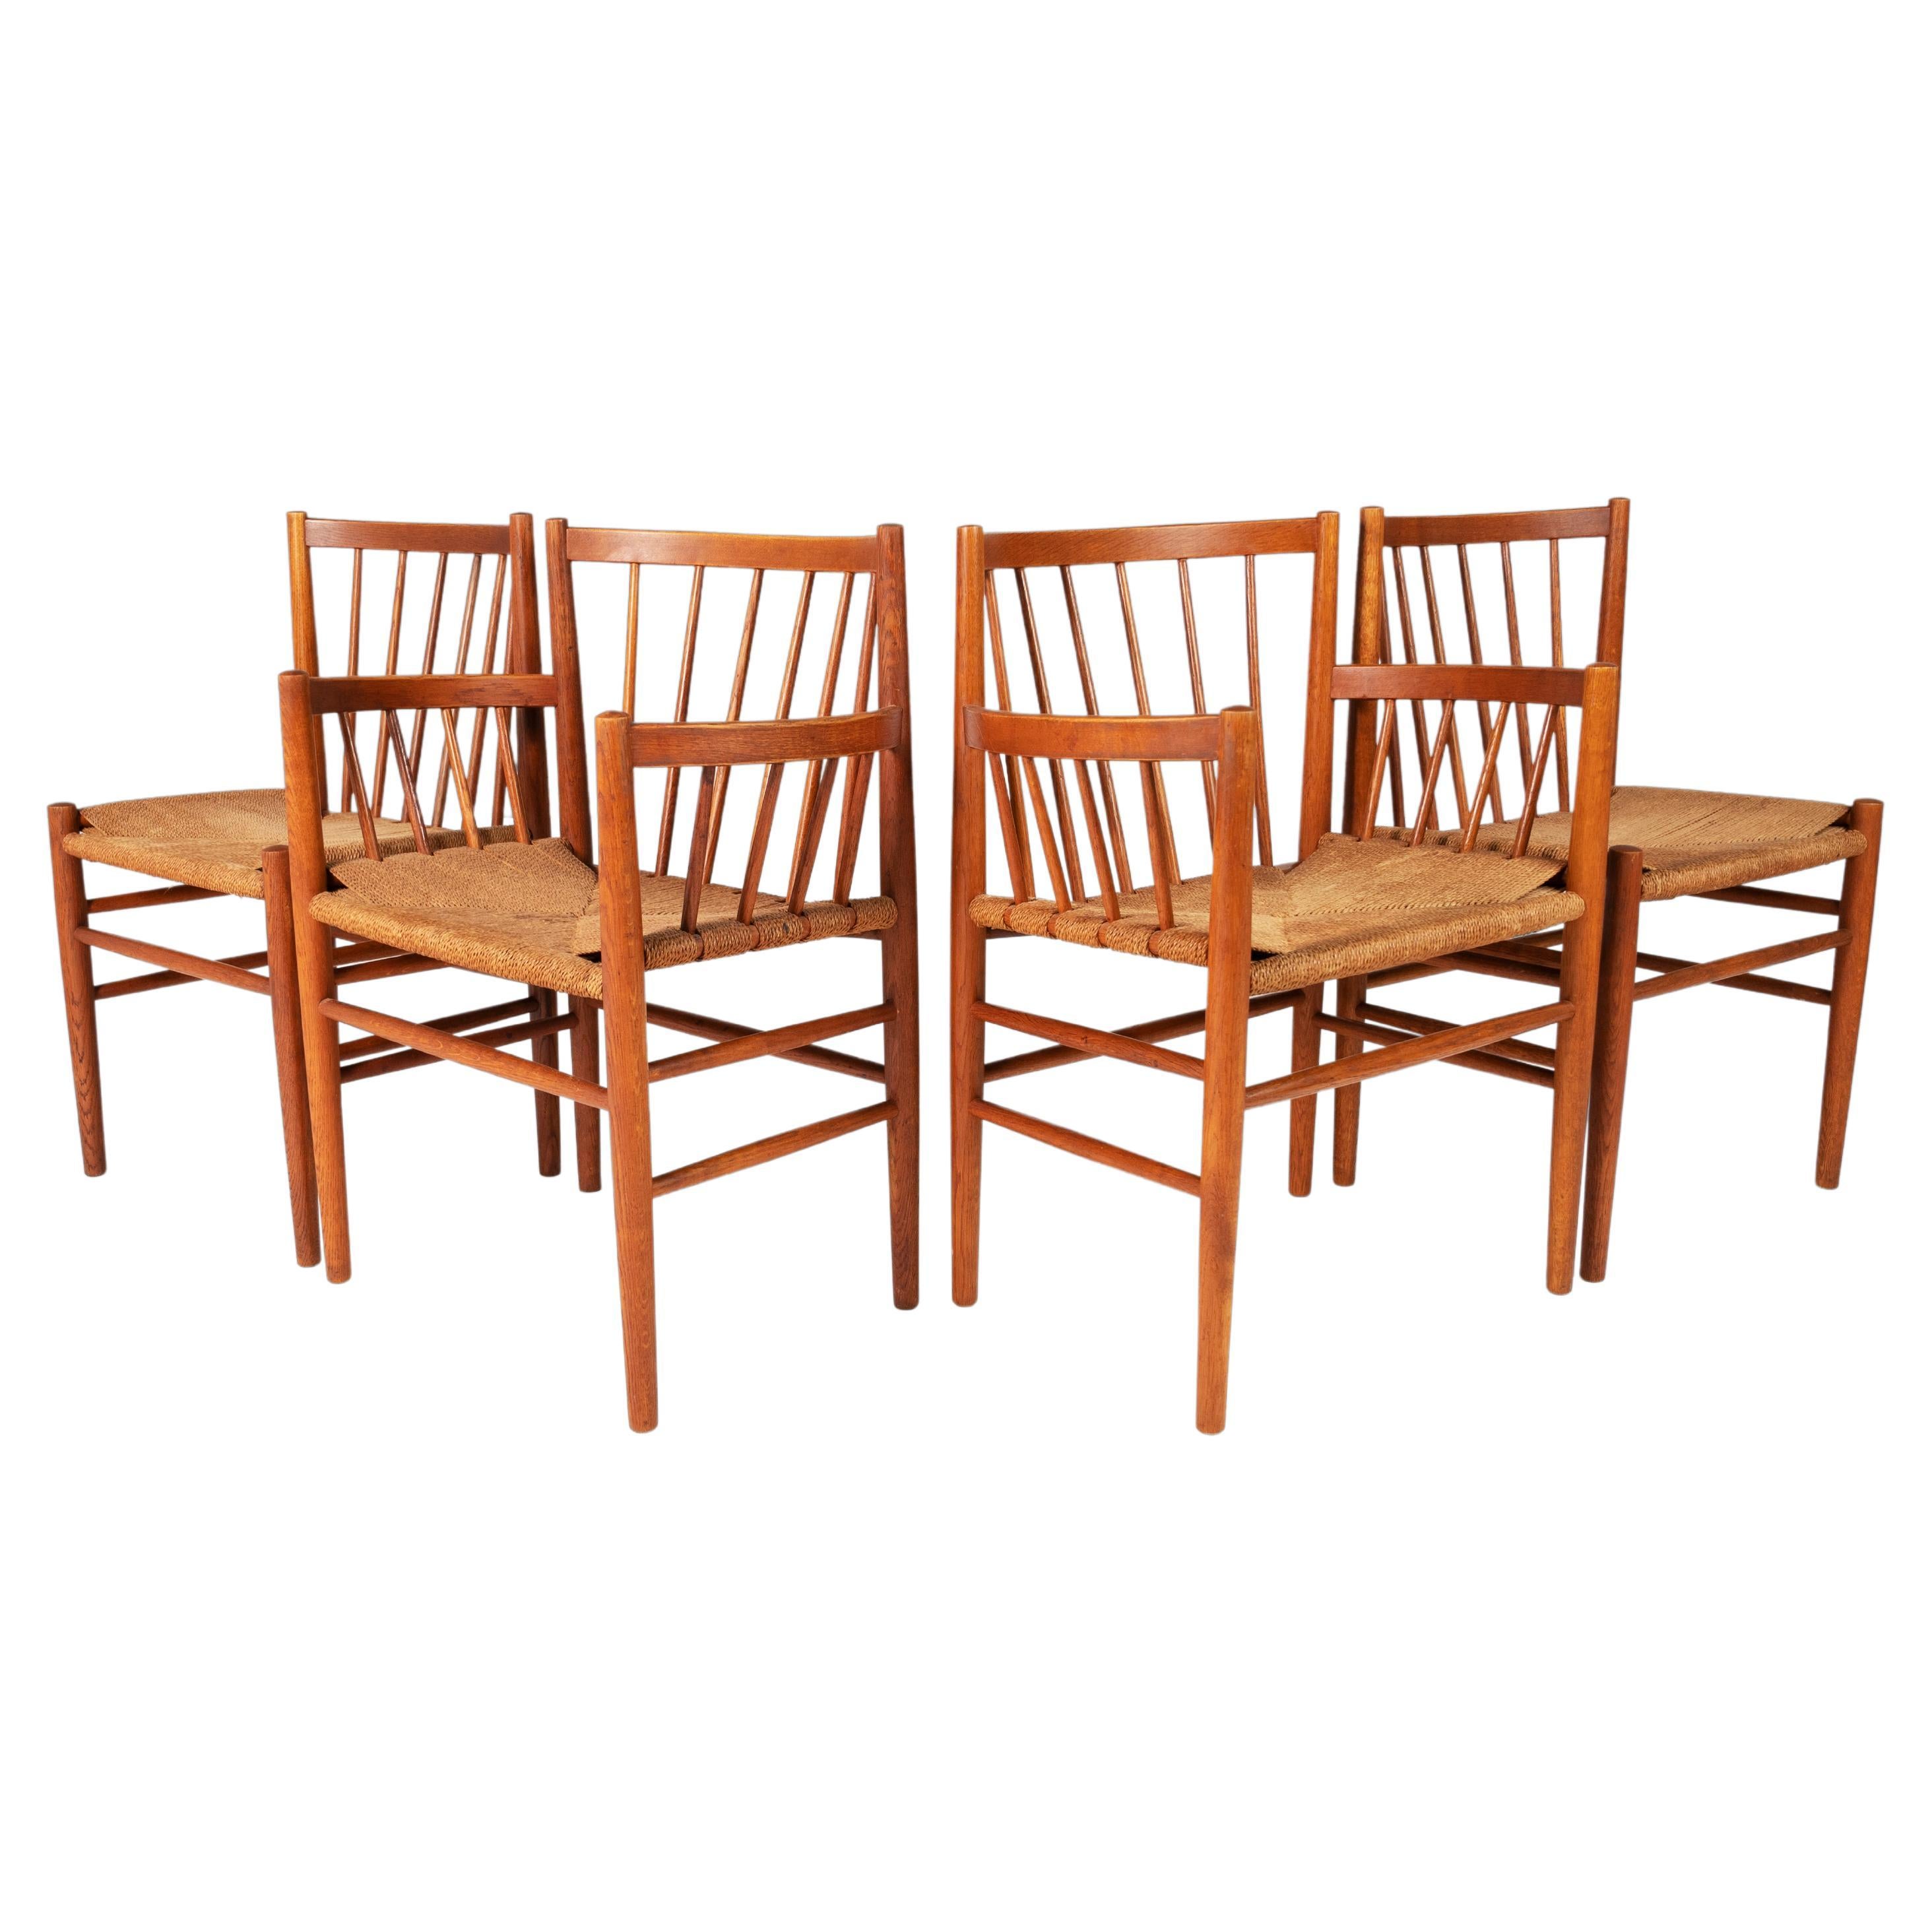 Set of Four '4' Dining Chairs by Jørgen Baekmark for FDB Møbler, Denmark, 1950's For Sale